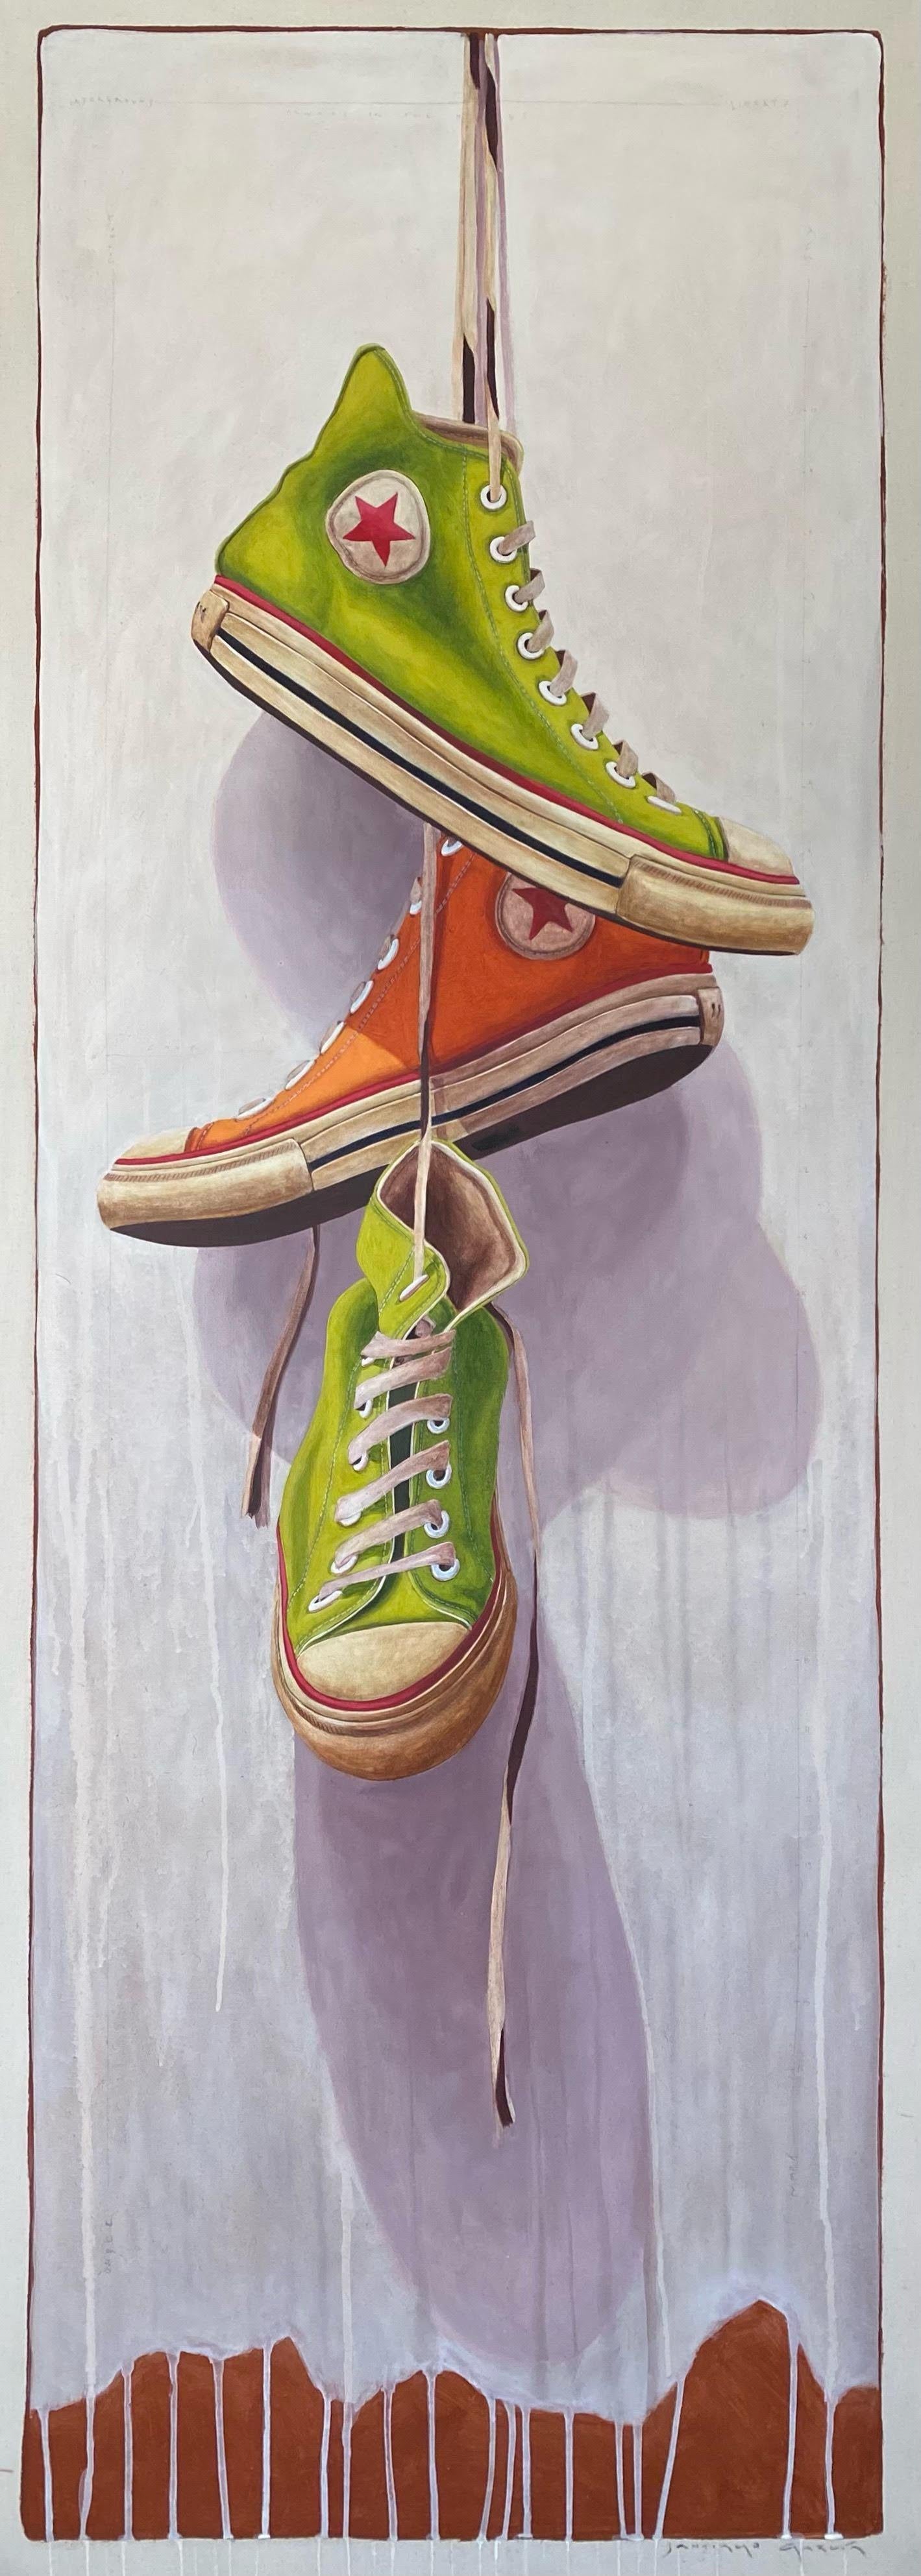 Santiago Garcia Figurative Painting - "#1411" oil painting of green & orange converse sneakers hanging by their laces